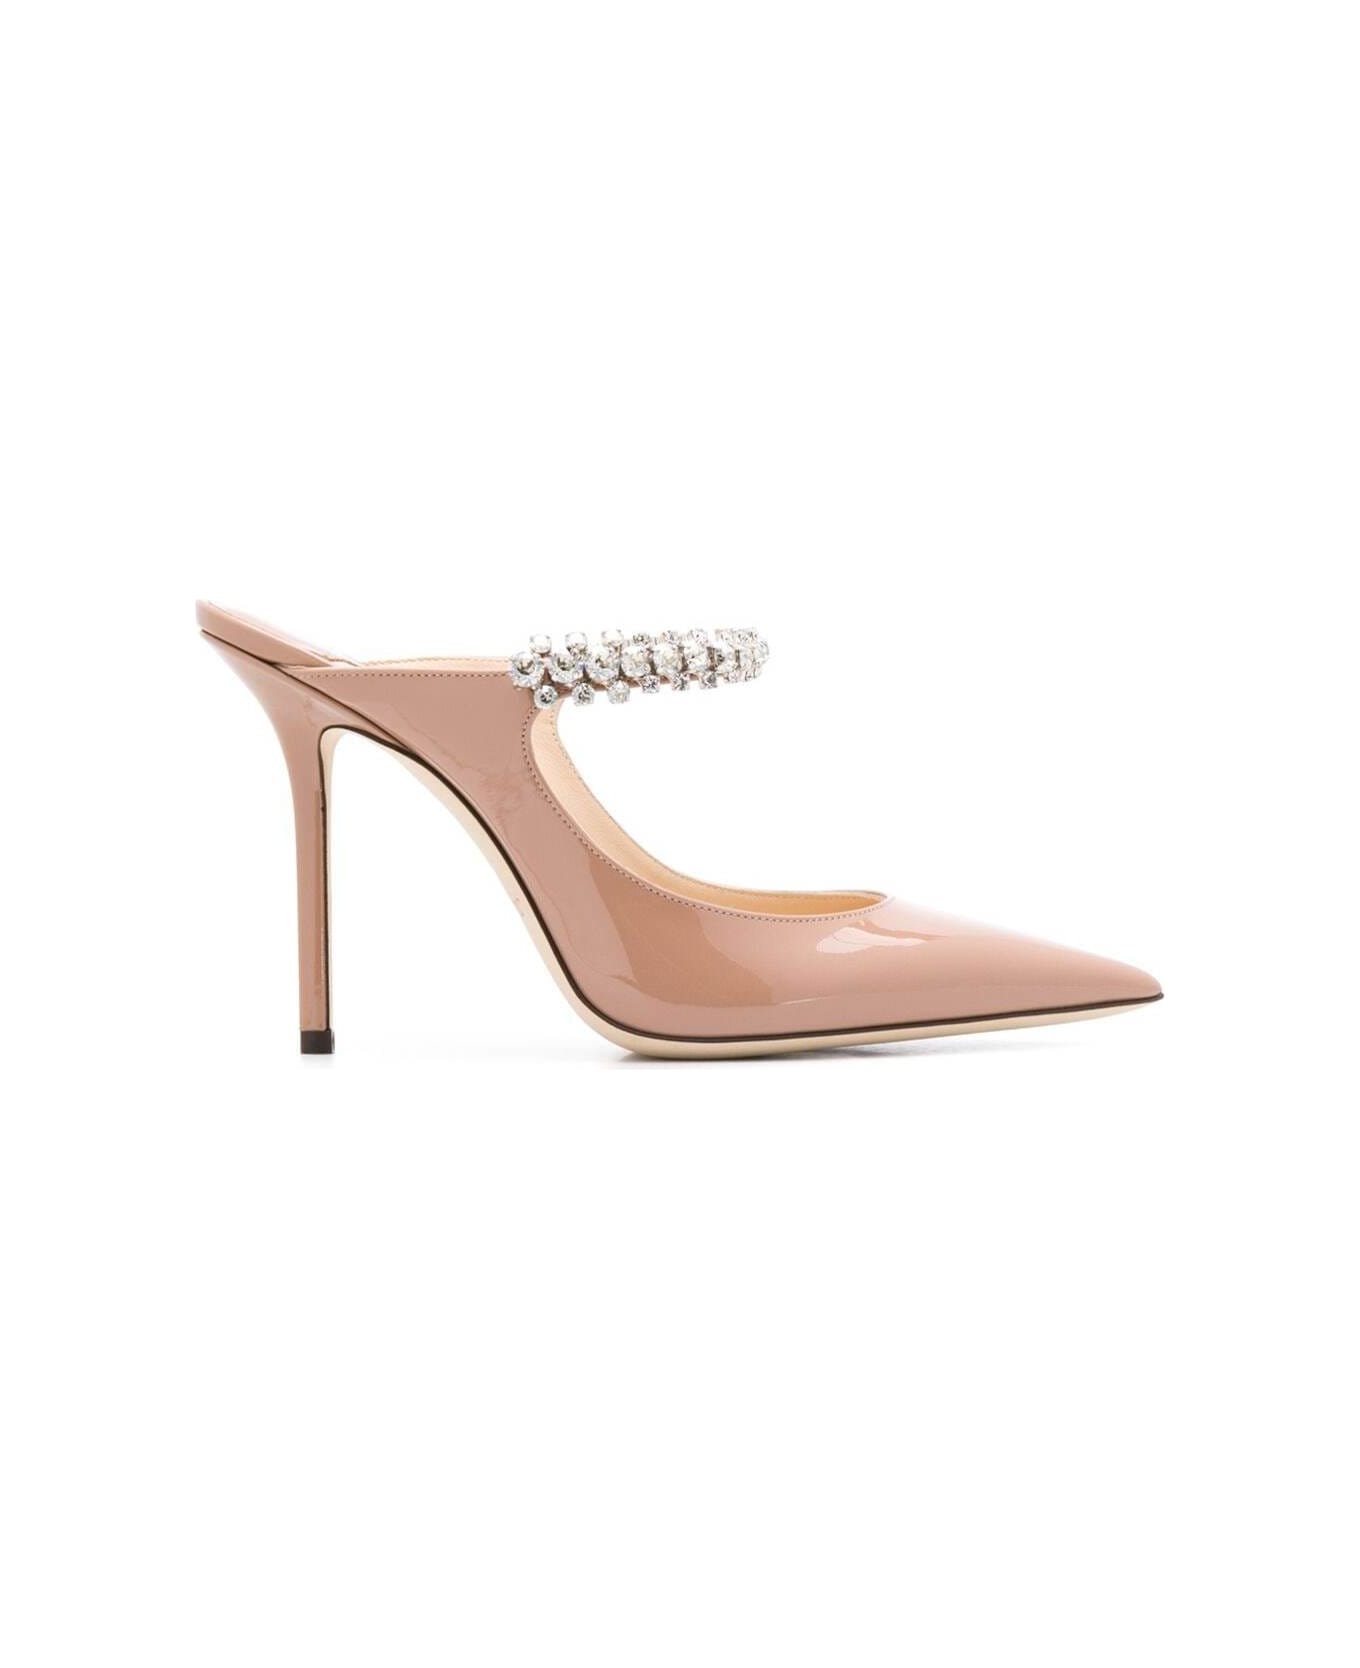 Jimmy Choo Pink Patent Leather Pumps With Crystal Strap Woman - Pink